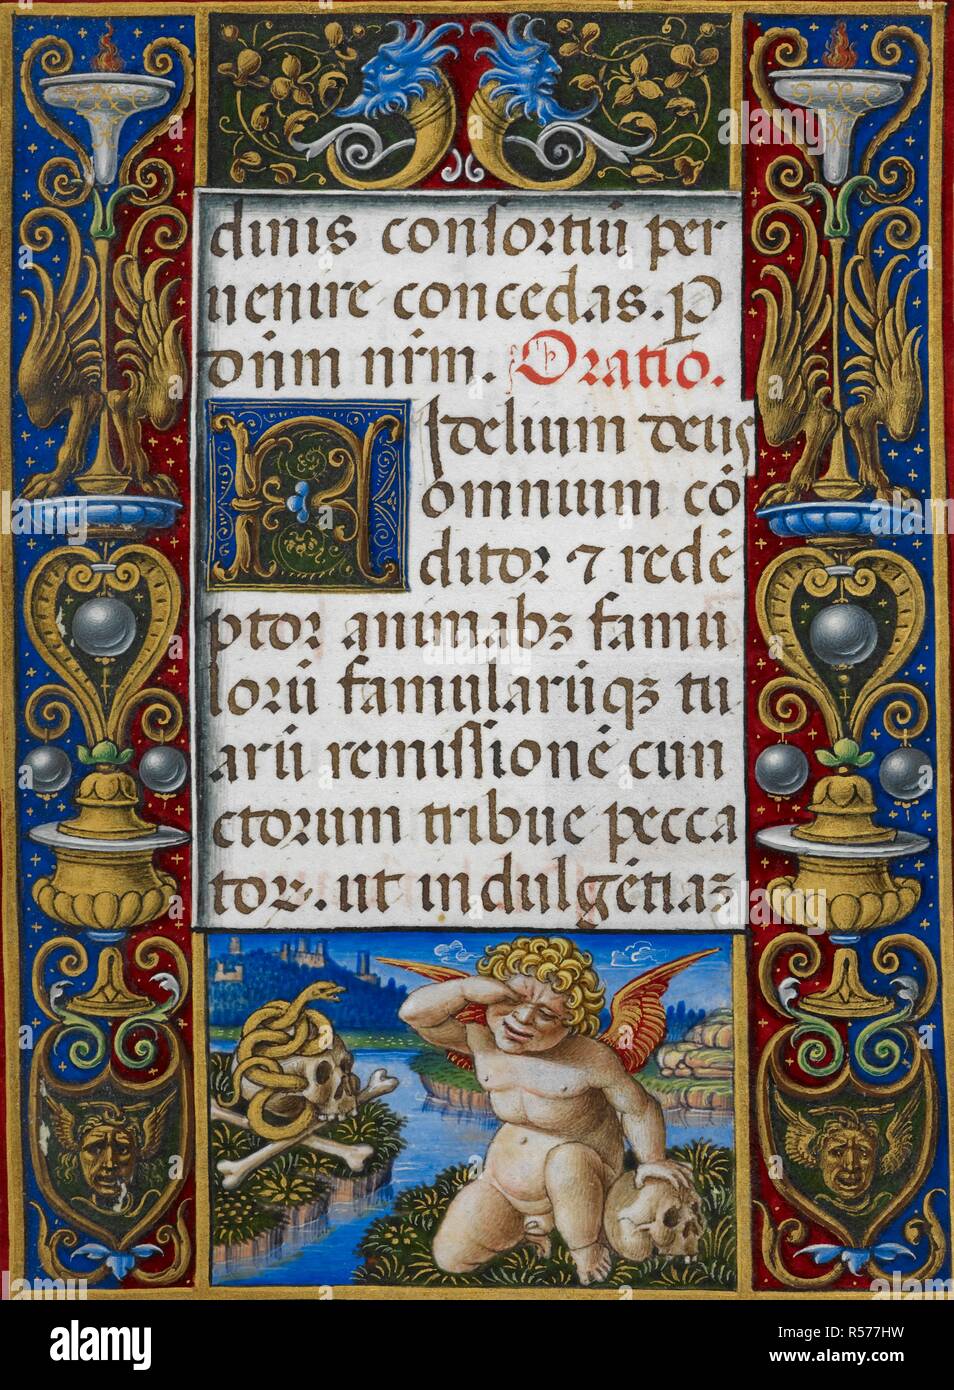 Text page from Office of the Dead showing a putto weeping with skulls, bones and serpent. Sforza Hours. Milan, circa 1490; Flemish insertions, 1517-1520. Source: Add. 34294, f.271. Language: Latin. Author: Birago, Giovan Pietro. Stock Photo